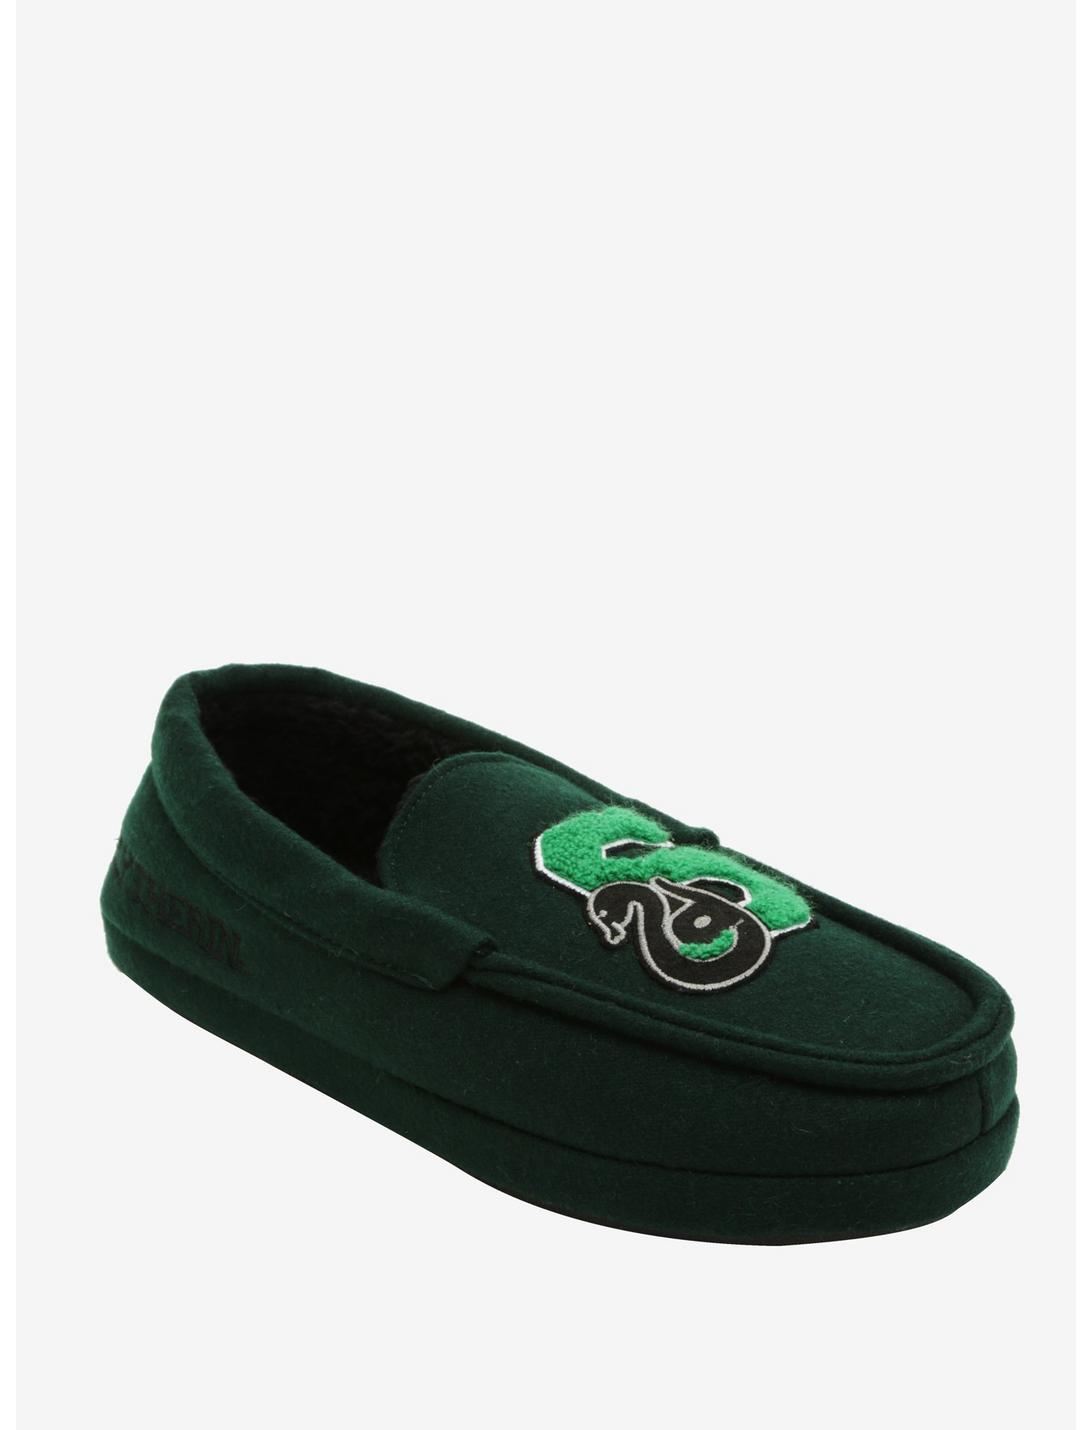 Harry Potter Slytherin Moccasin Slippers, GREEN, hi-res